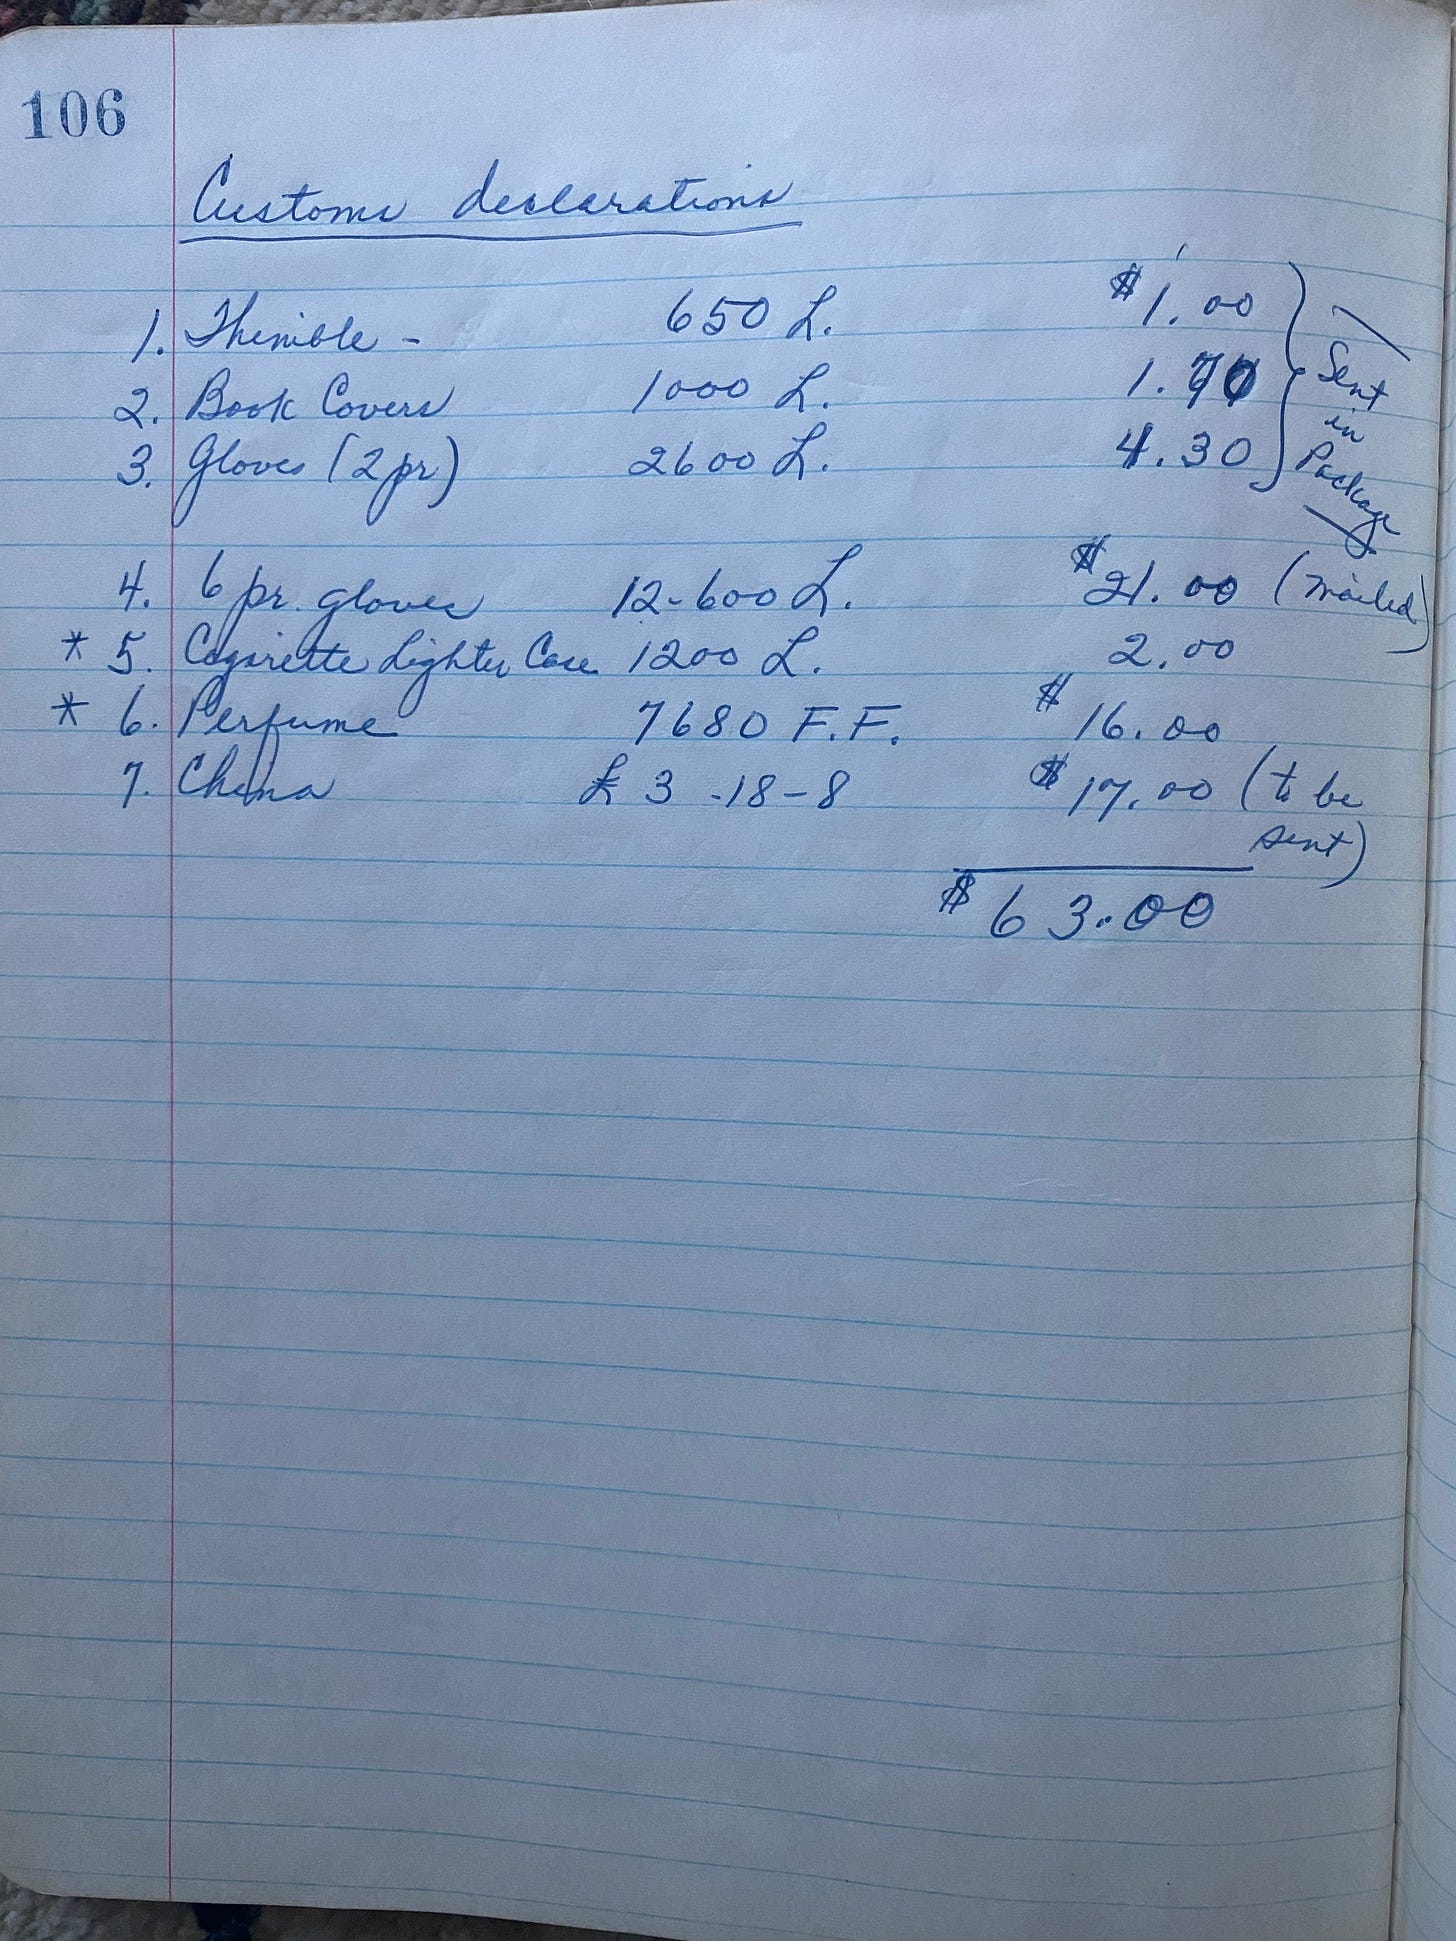 Handwritten list of items to declare for customs, from a 1960 travel journal